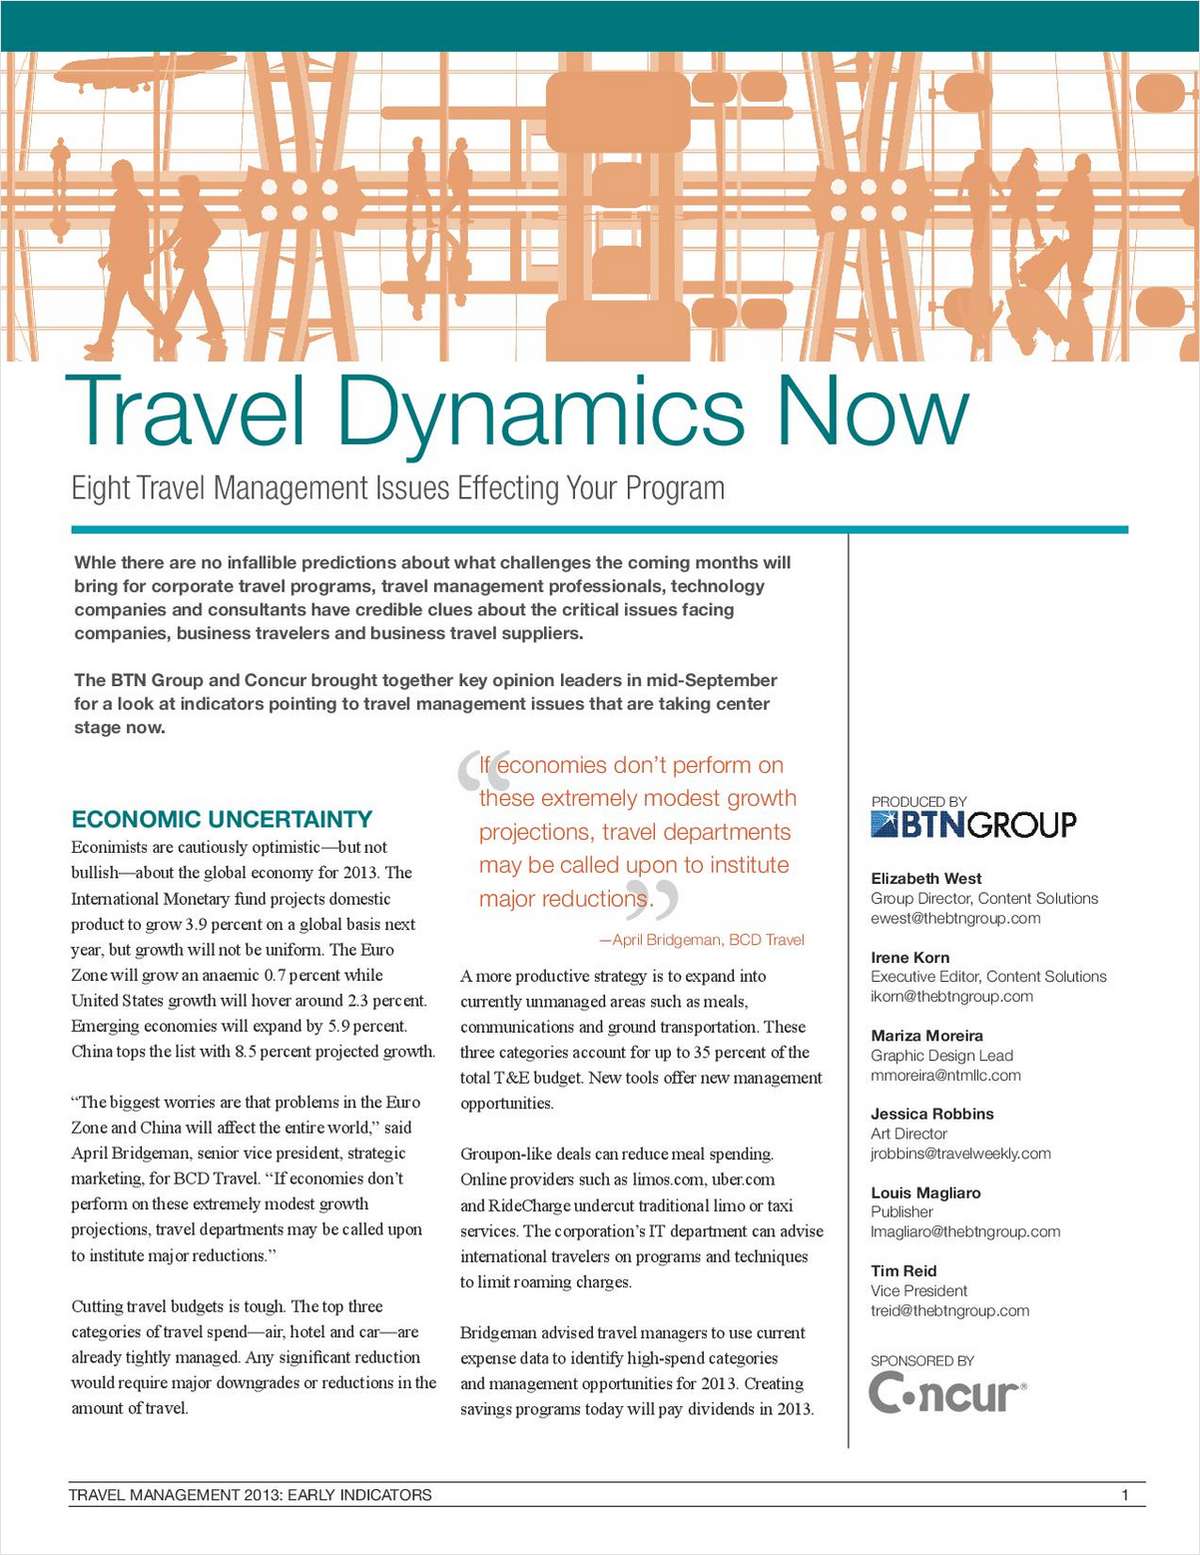 Travel Dynamics Now - Eight Travel Management Issues Effecting Your Program